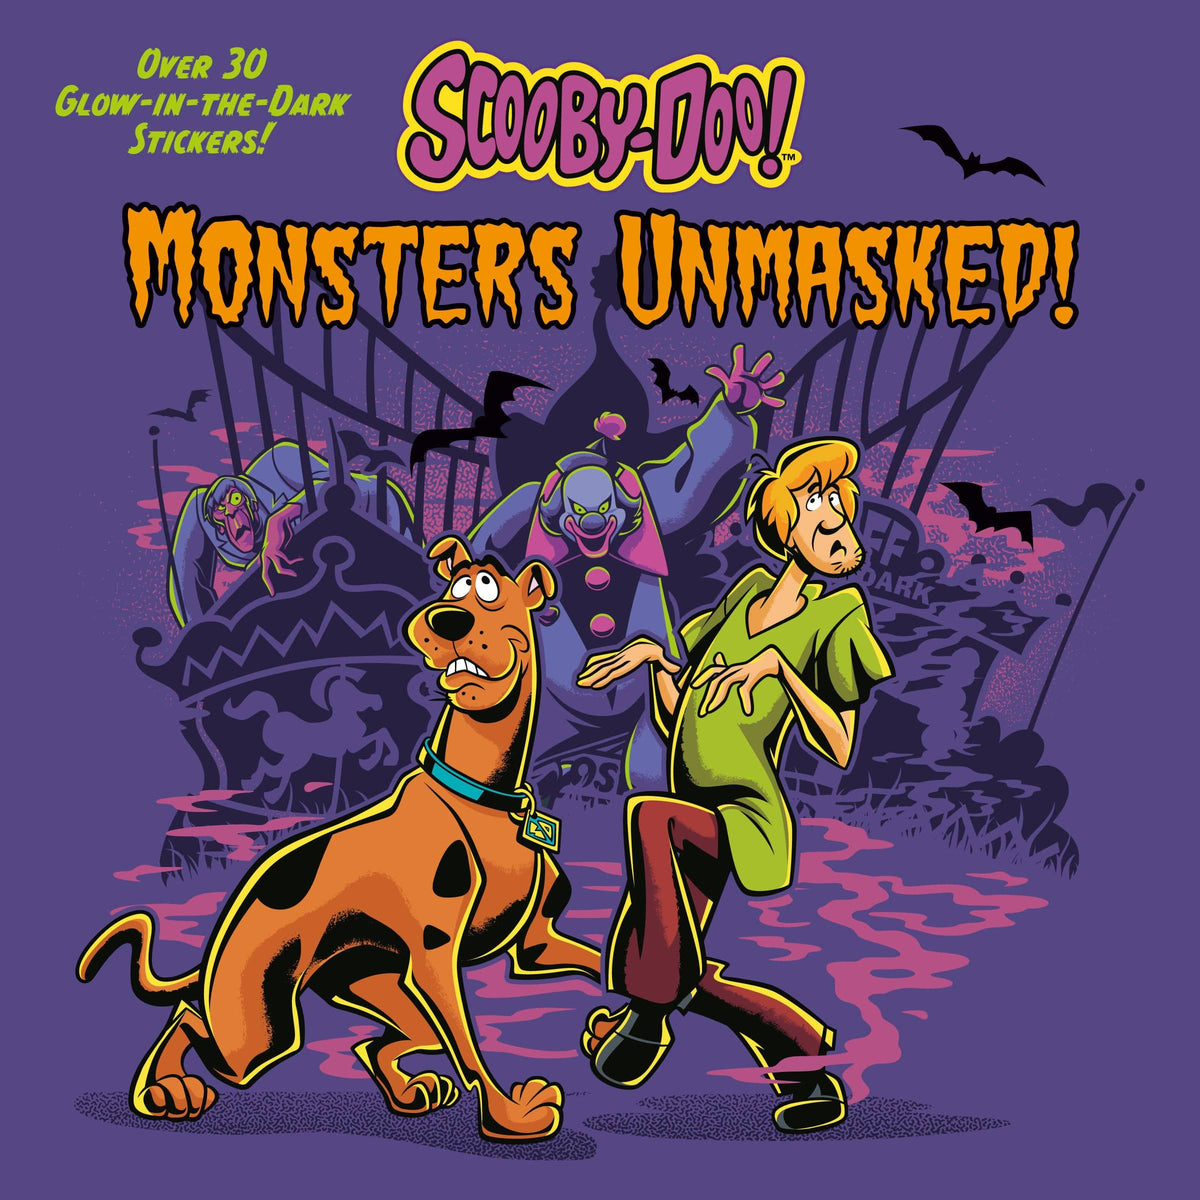 Monsters Unmasked! (Scooby-Doo) - Third Eye